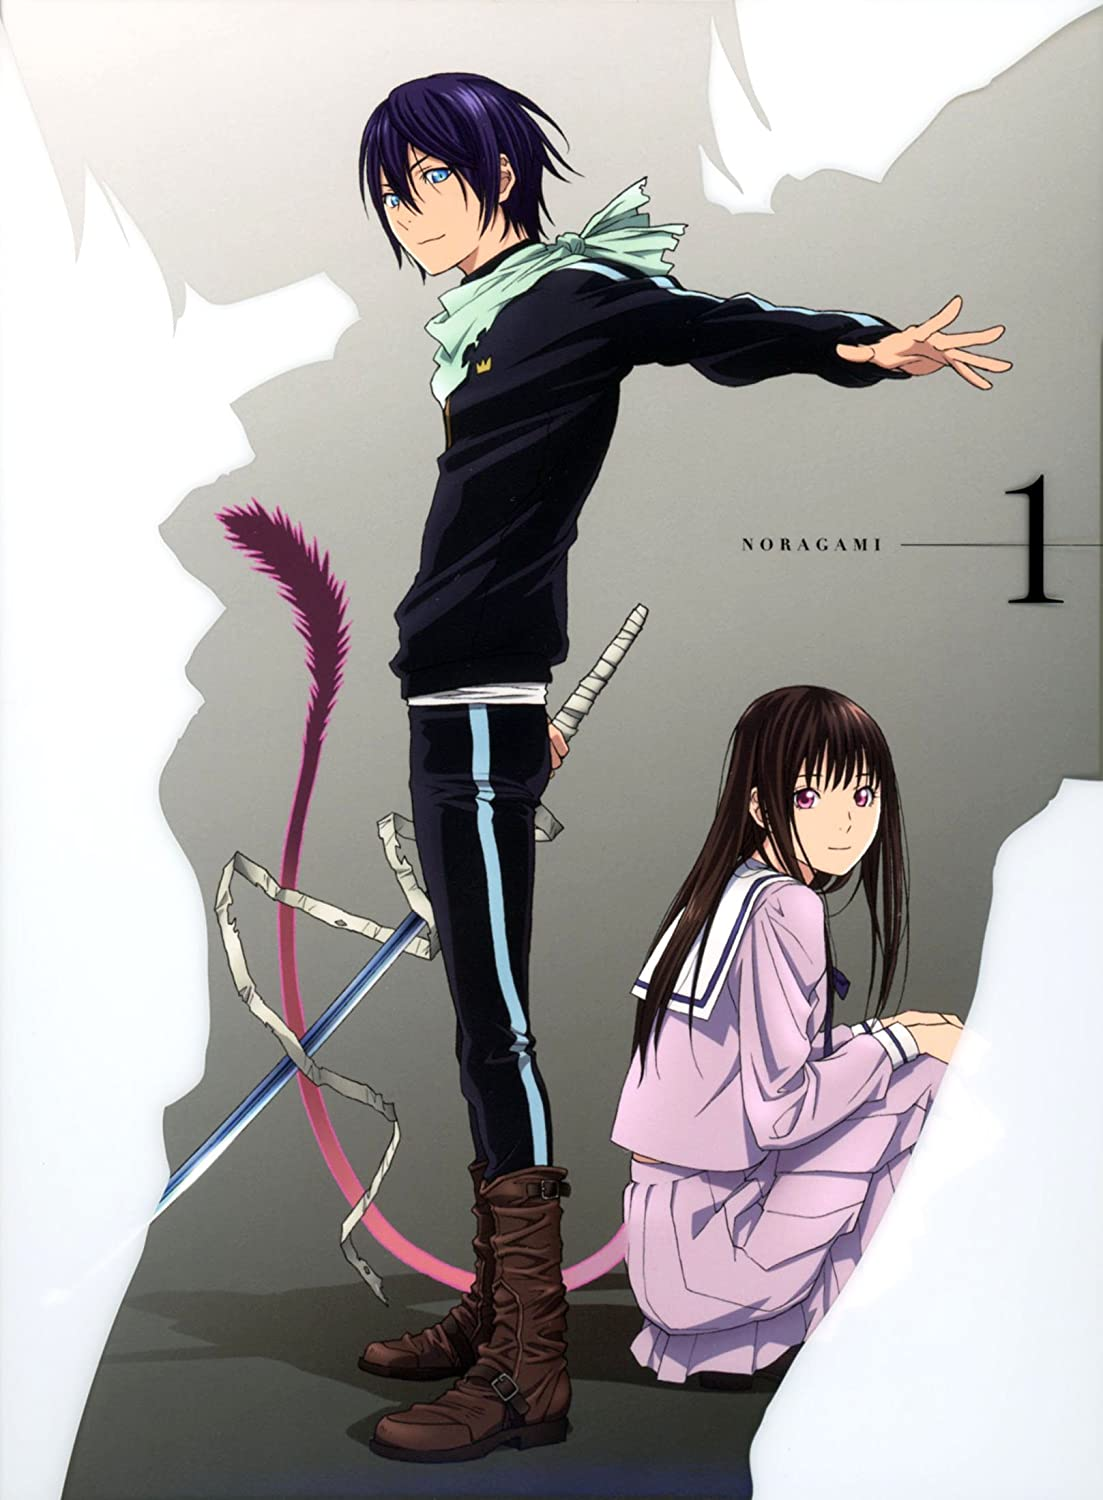 Noragami Ep. 1  A Housecat, a Stray God, and a Tail 